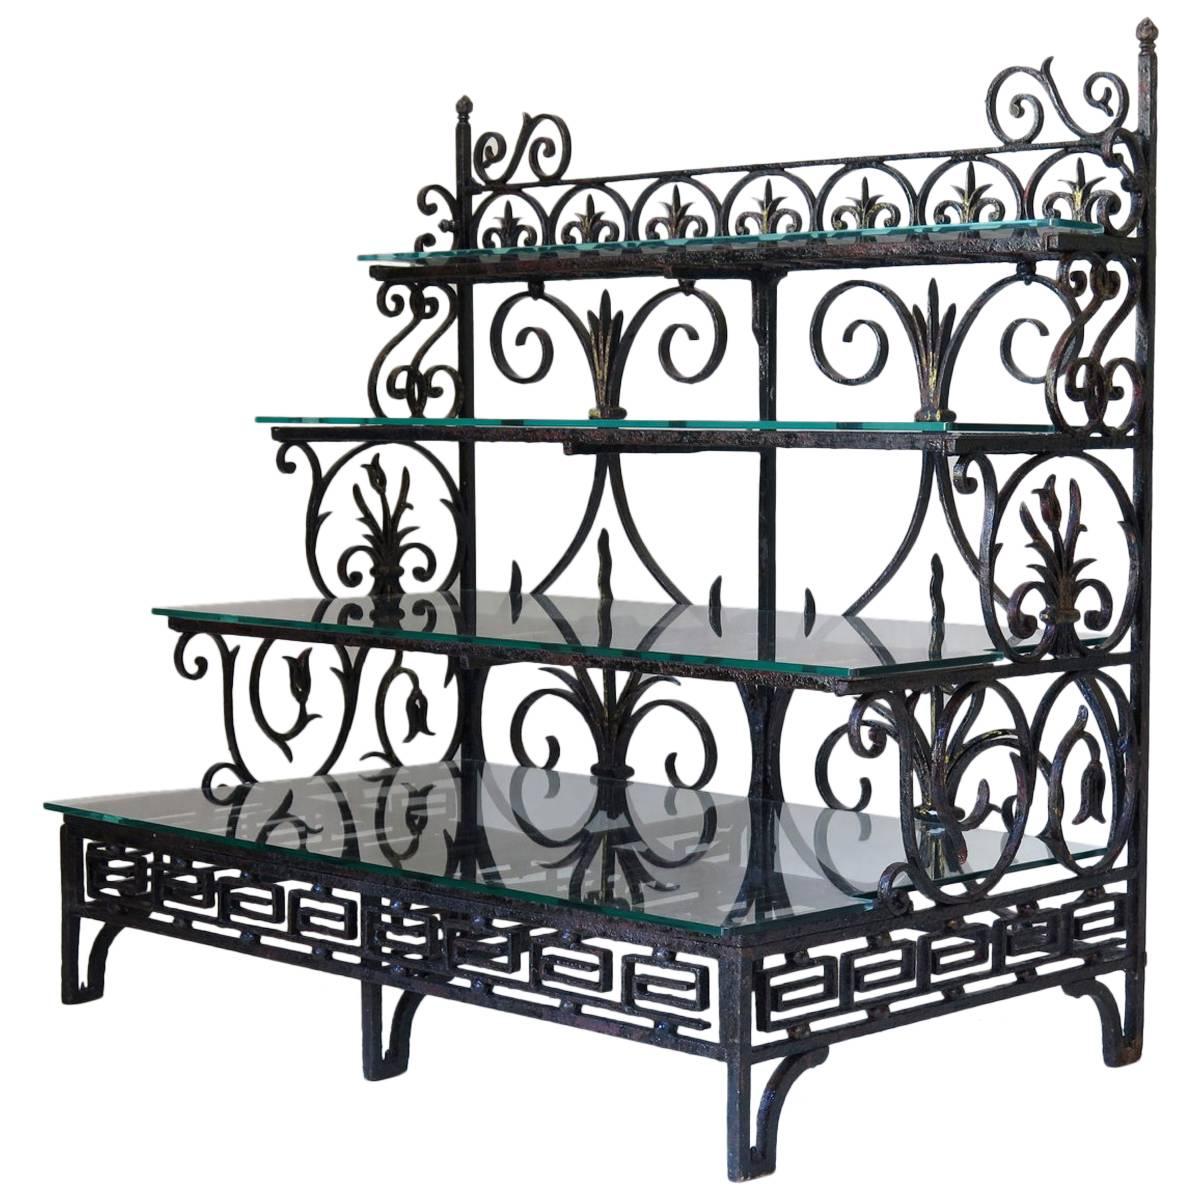 French Wrought-Iron Shelves, Dated "1889" For Sale